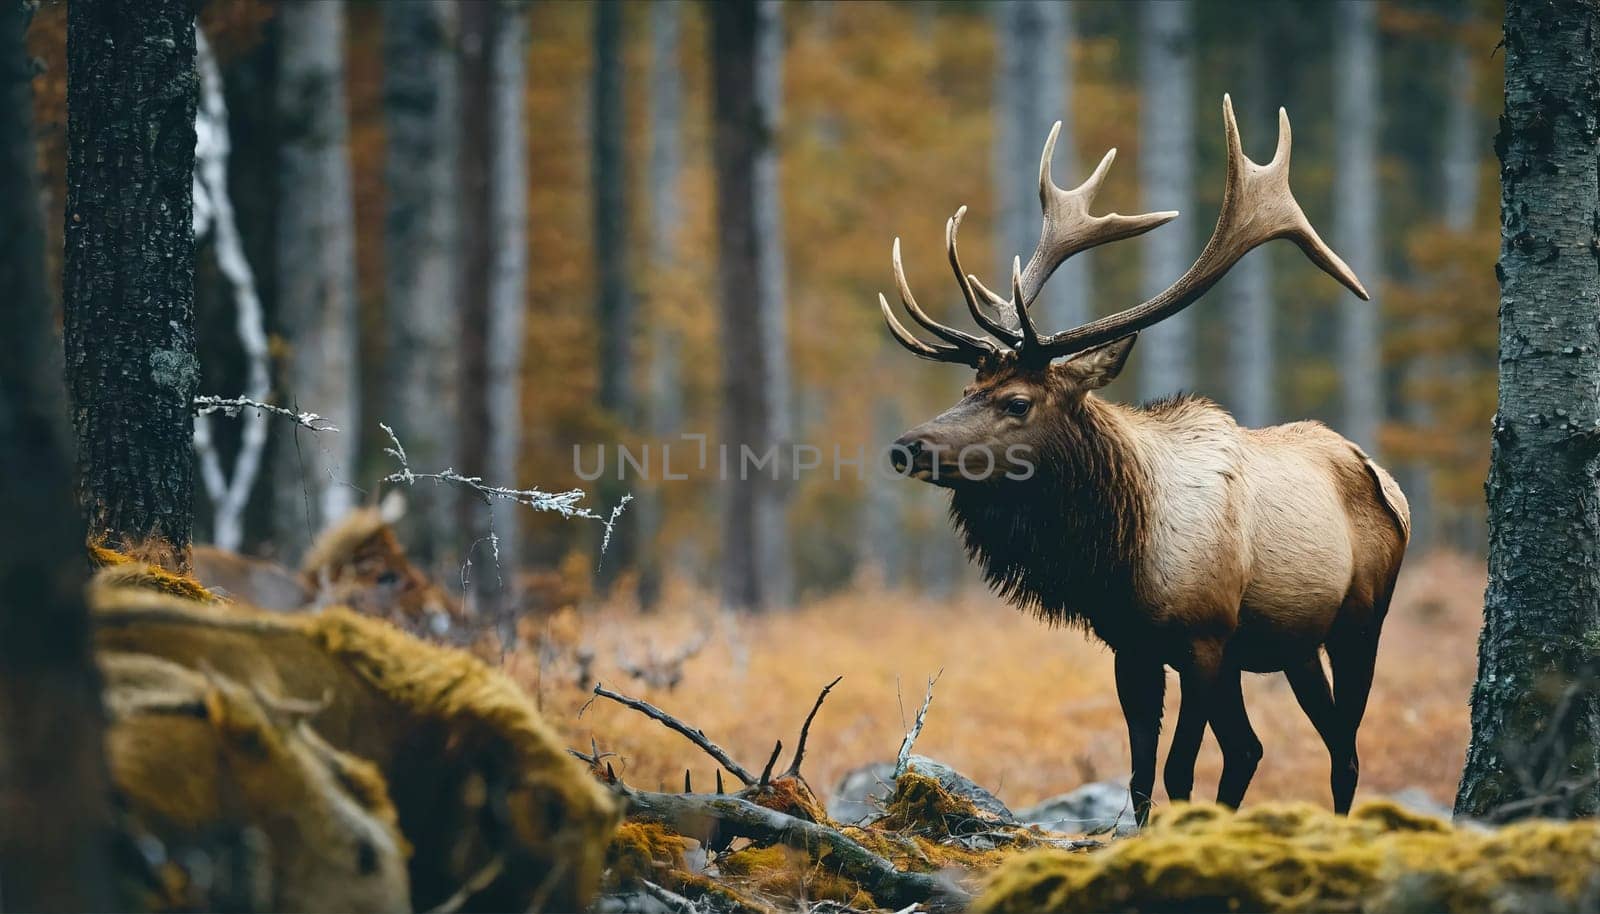 A deer with big antlers wanders in the forest by gordiza